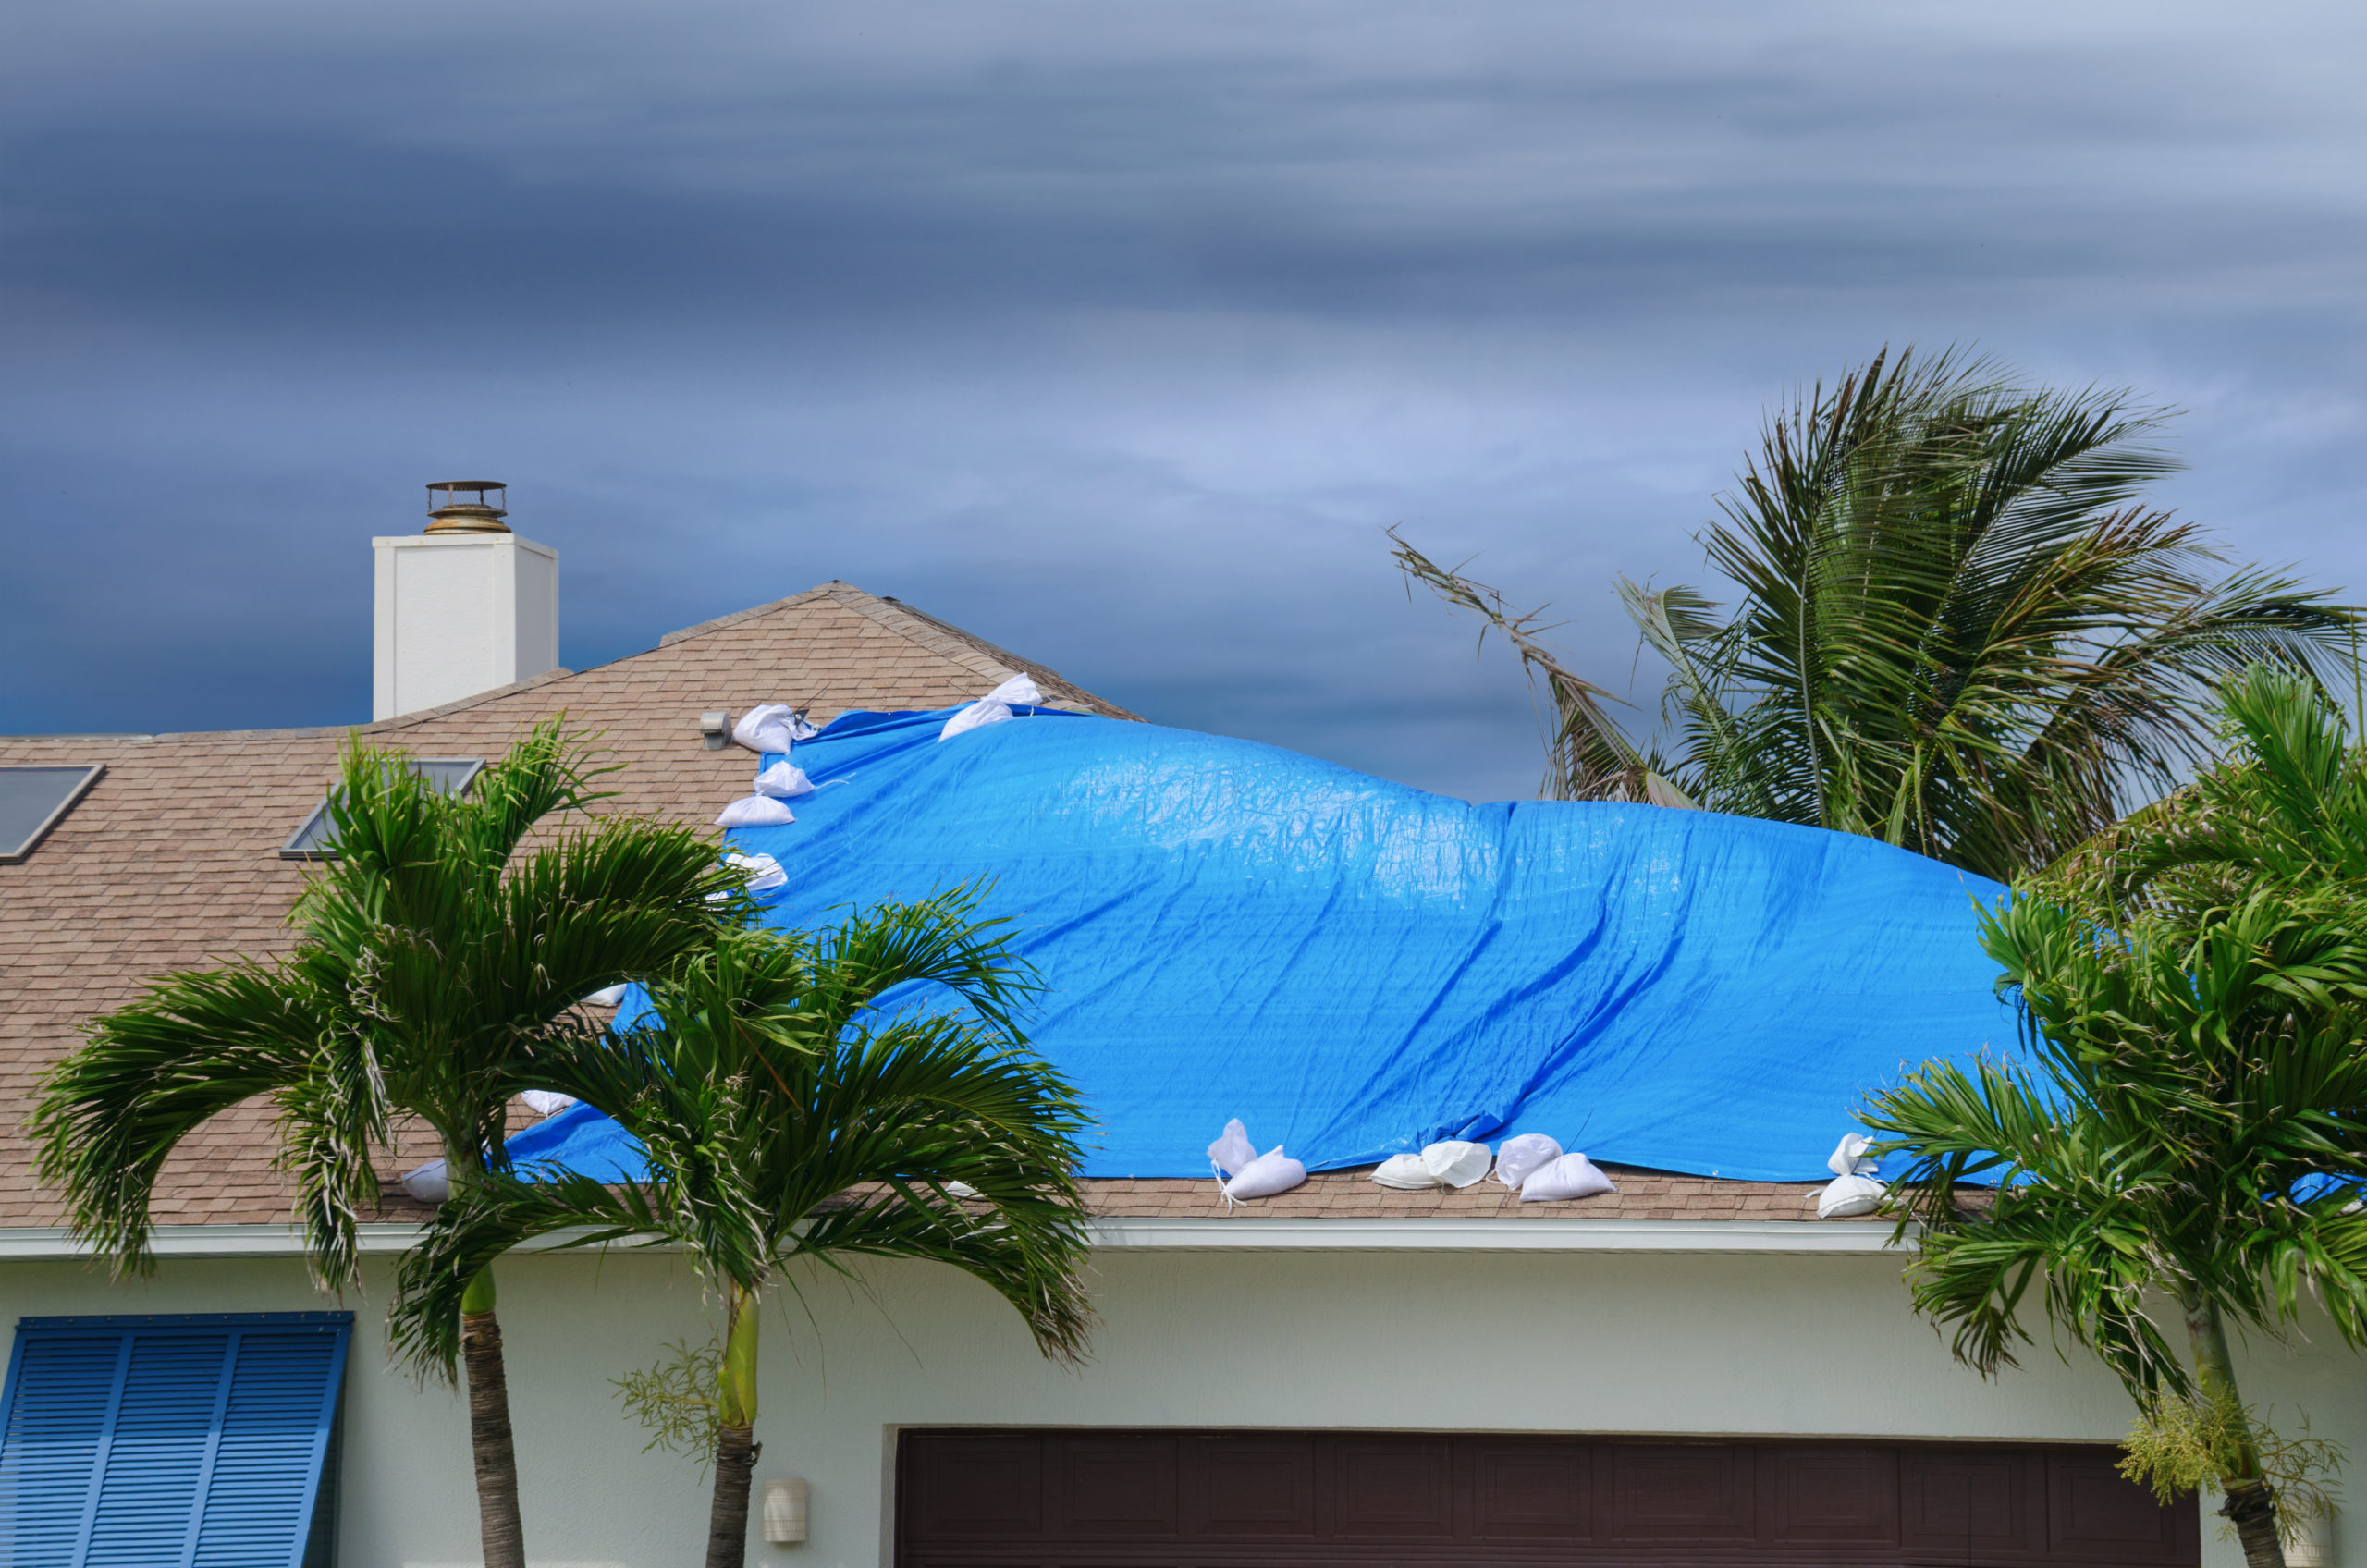 Florida homeowners insurance claims lawyers